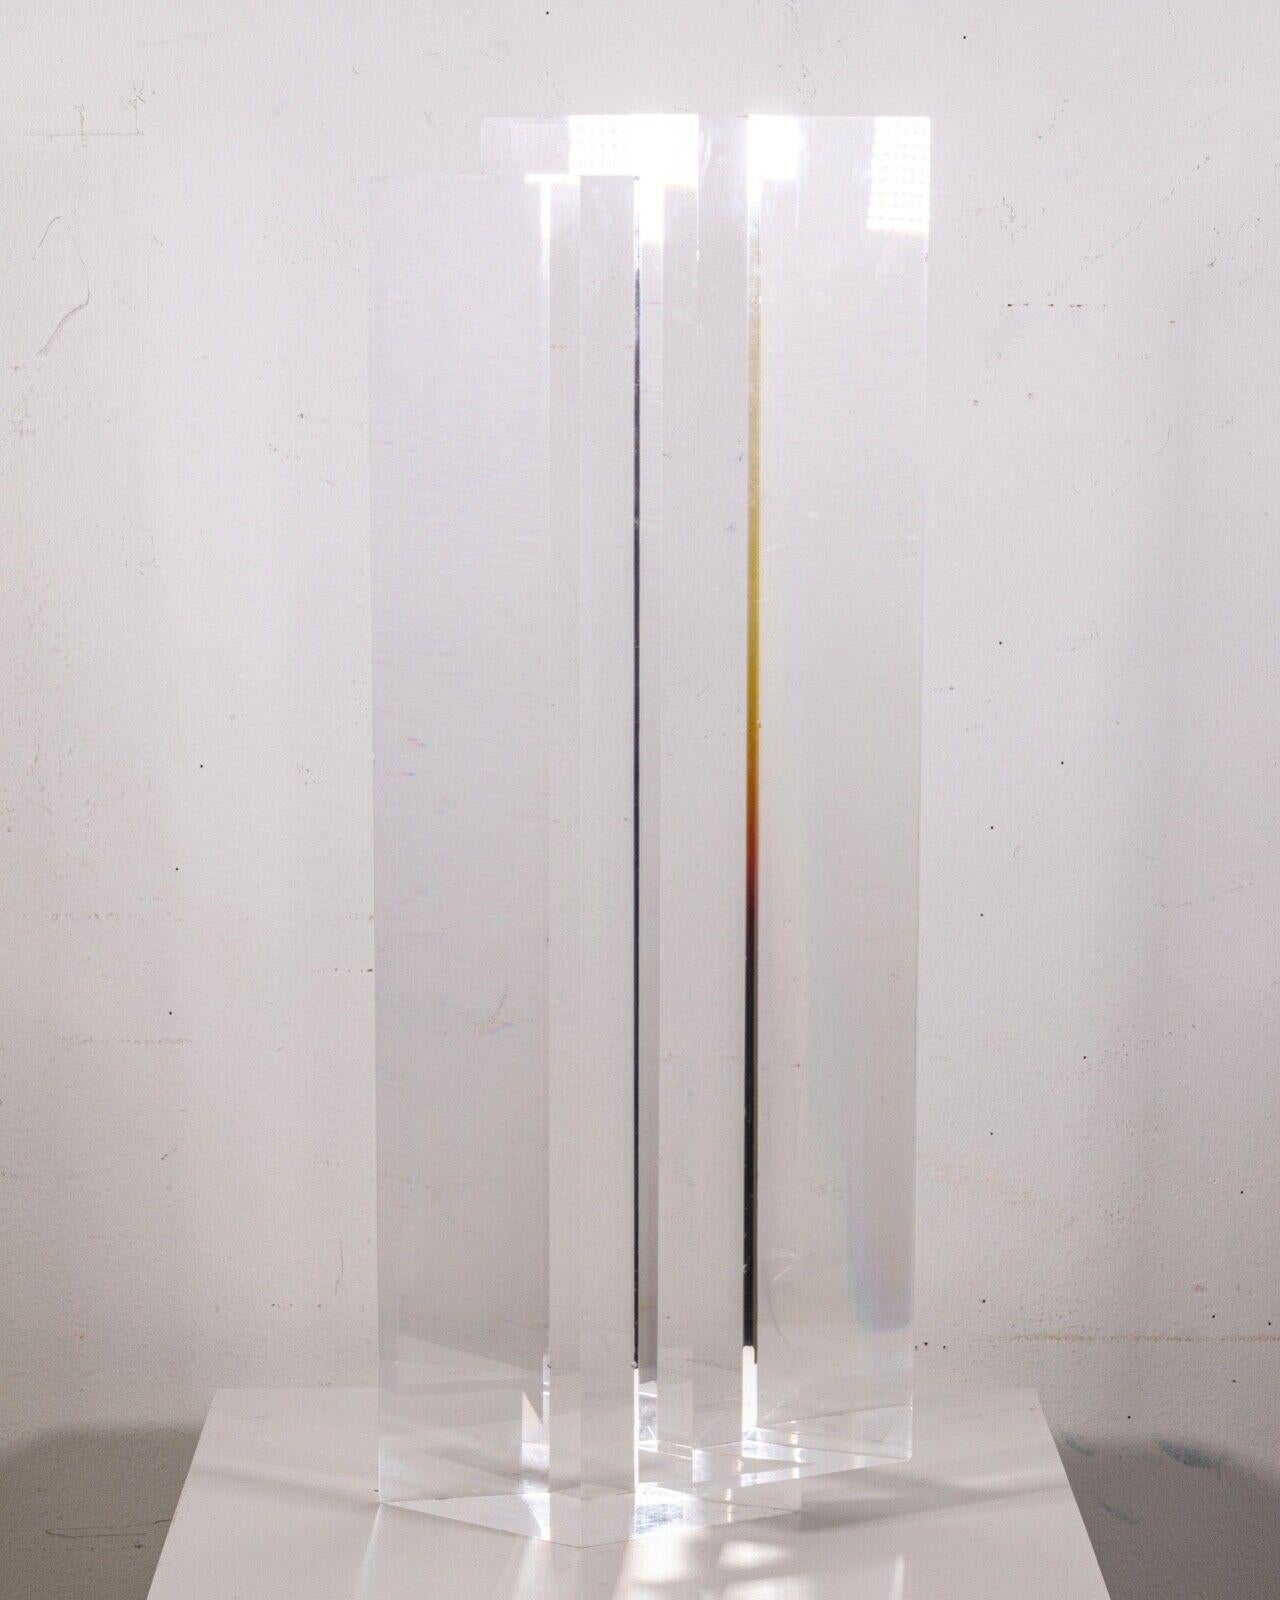 A unique monolithic lucite prism postmodern contemporary tower sculpture by Alessio Tasca. Etched signature on the side. Circa late 1970s early 1980s. An elegant minimal sculpture that compliments any modern or contemporary space. Tasca is a